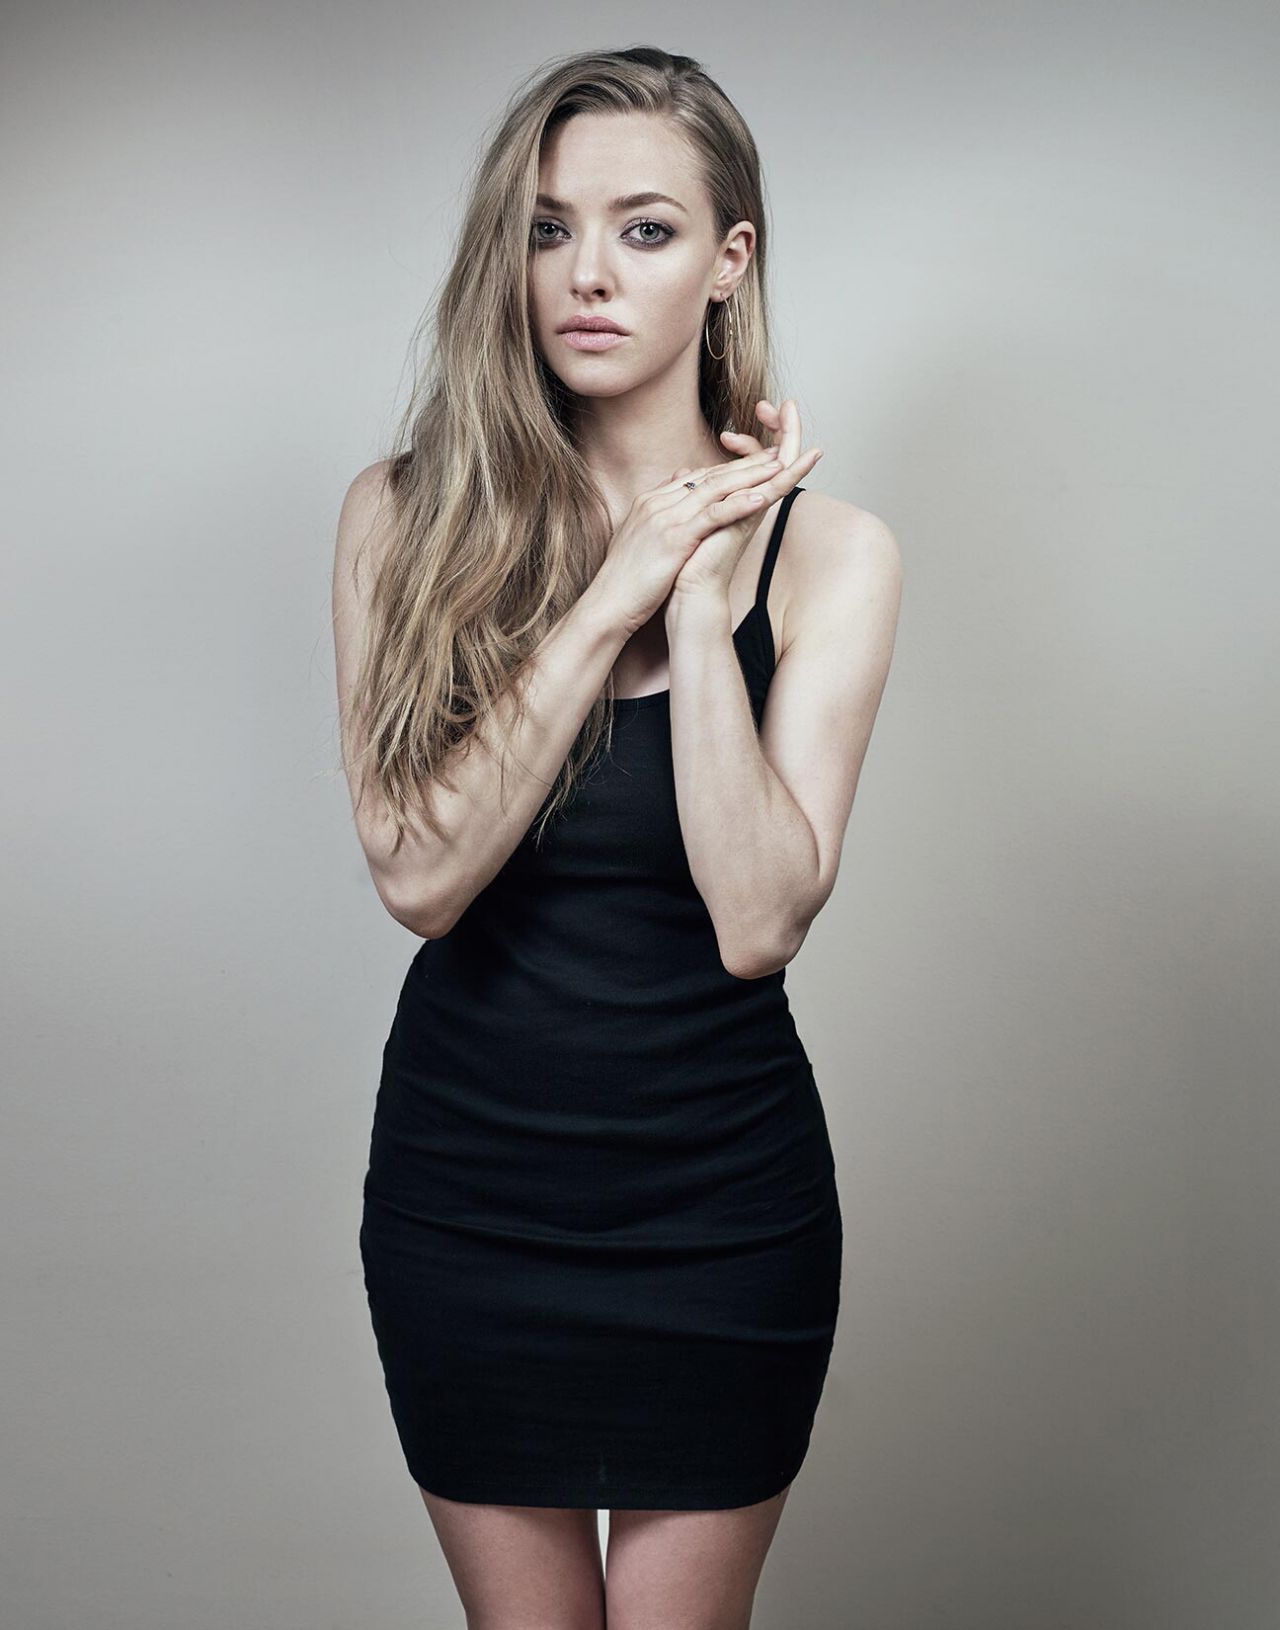 amanda-seyfried-photoshoot-for-the-way-we-get-by-2015-_1.jpg